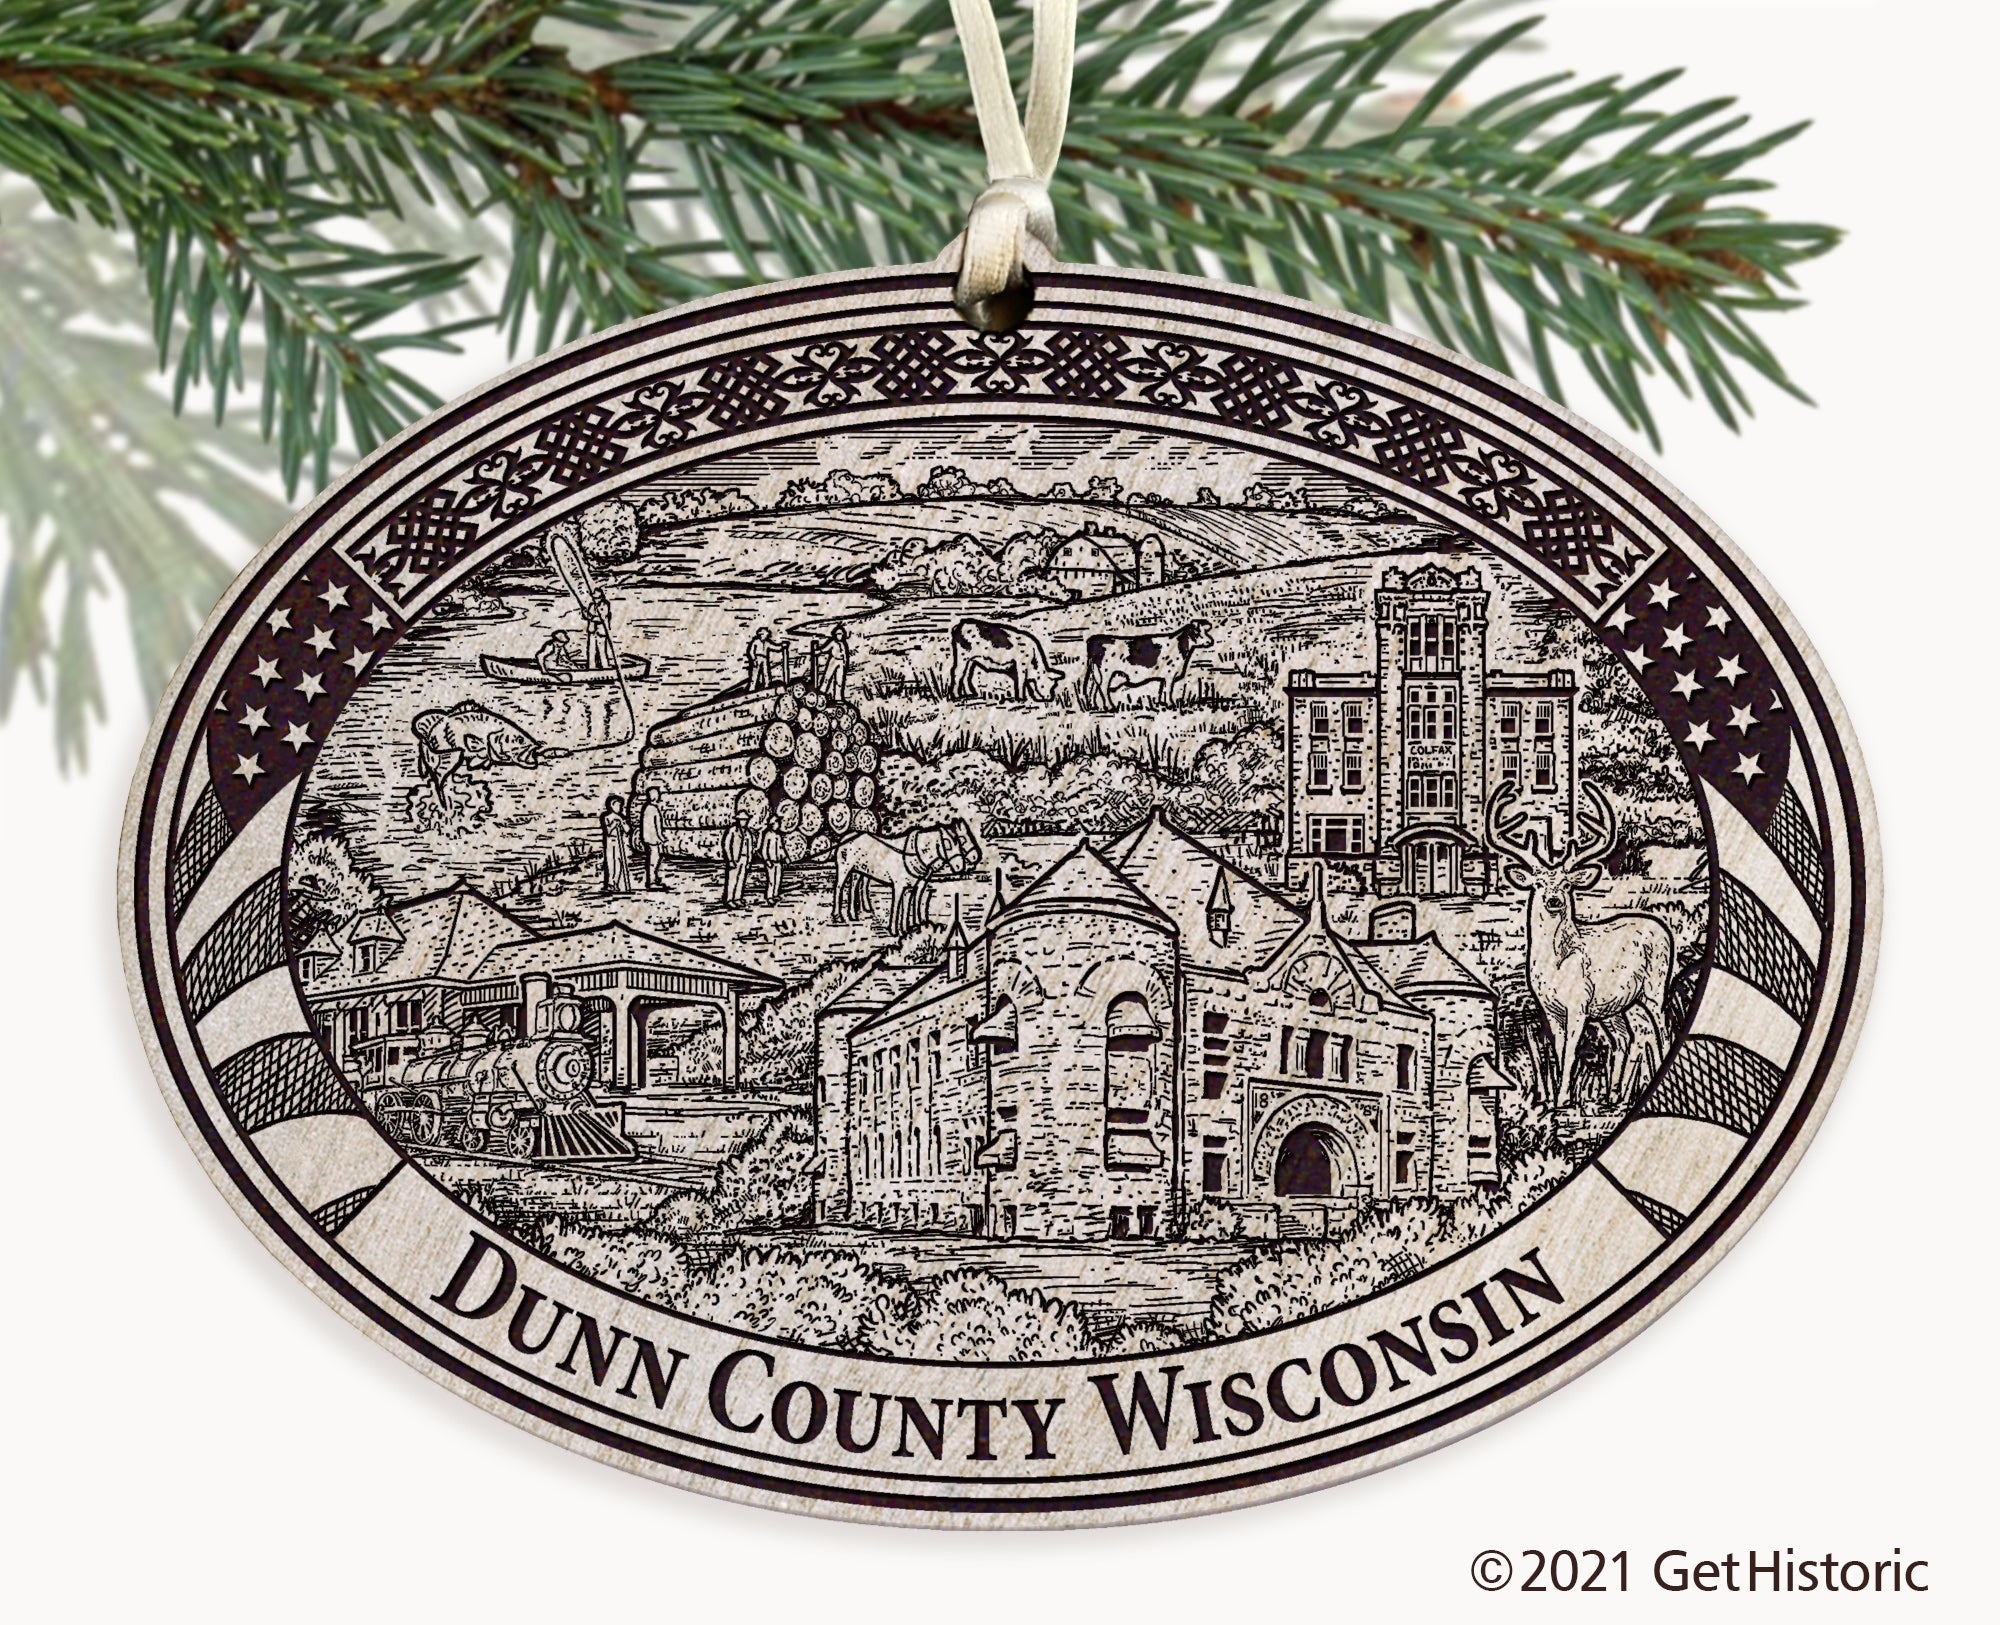 Dunn County Wisconsin Engraved Ornament